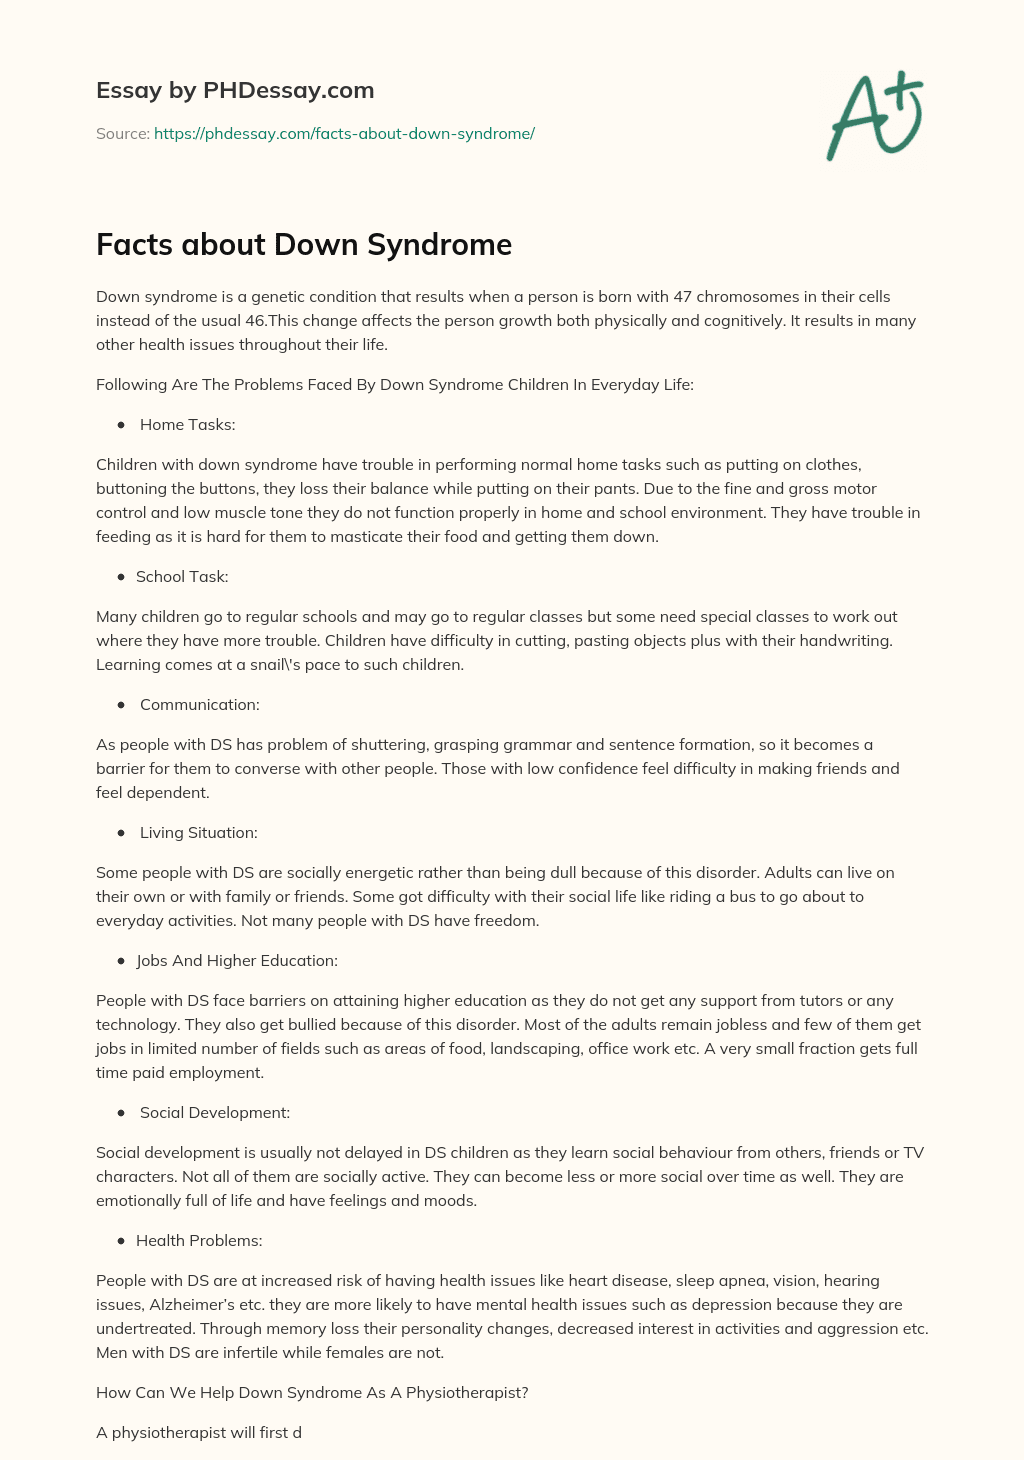 Facts about Down Syndrome essay